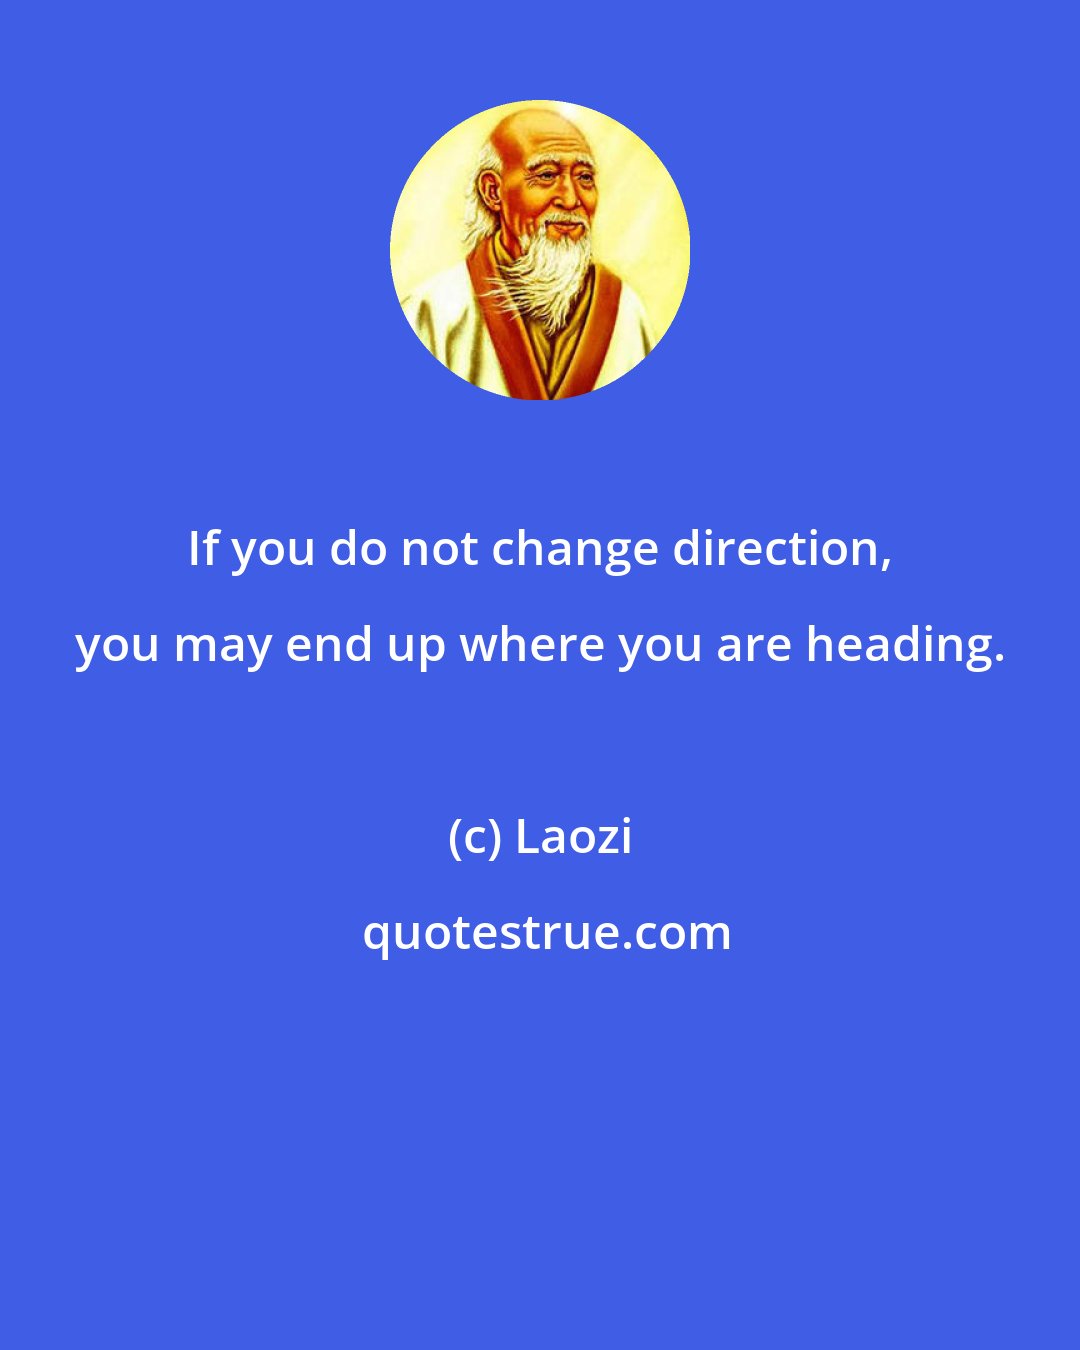 Laozi: If you do not change direction, you may end up where you are heading.